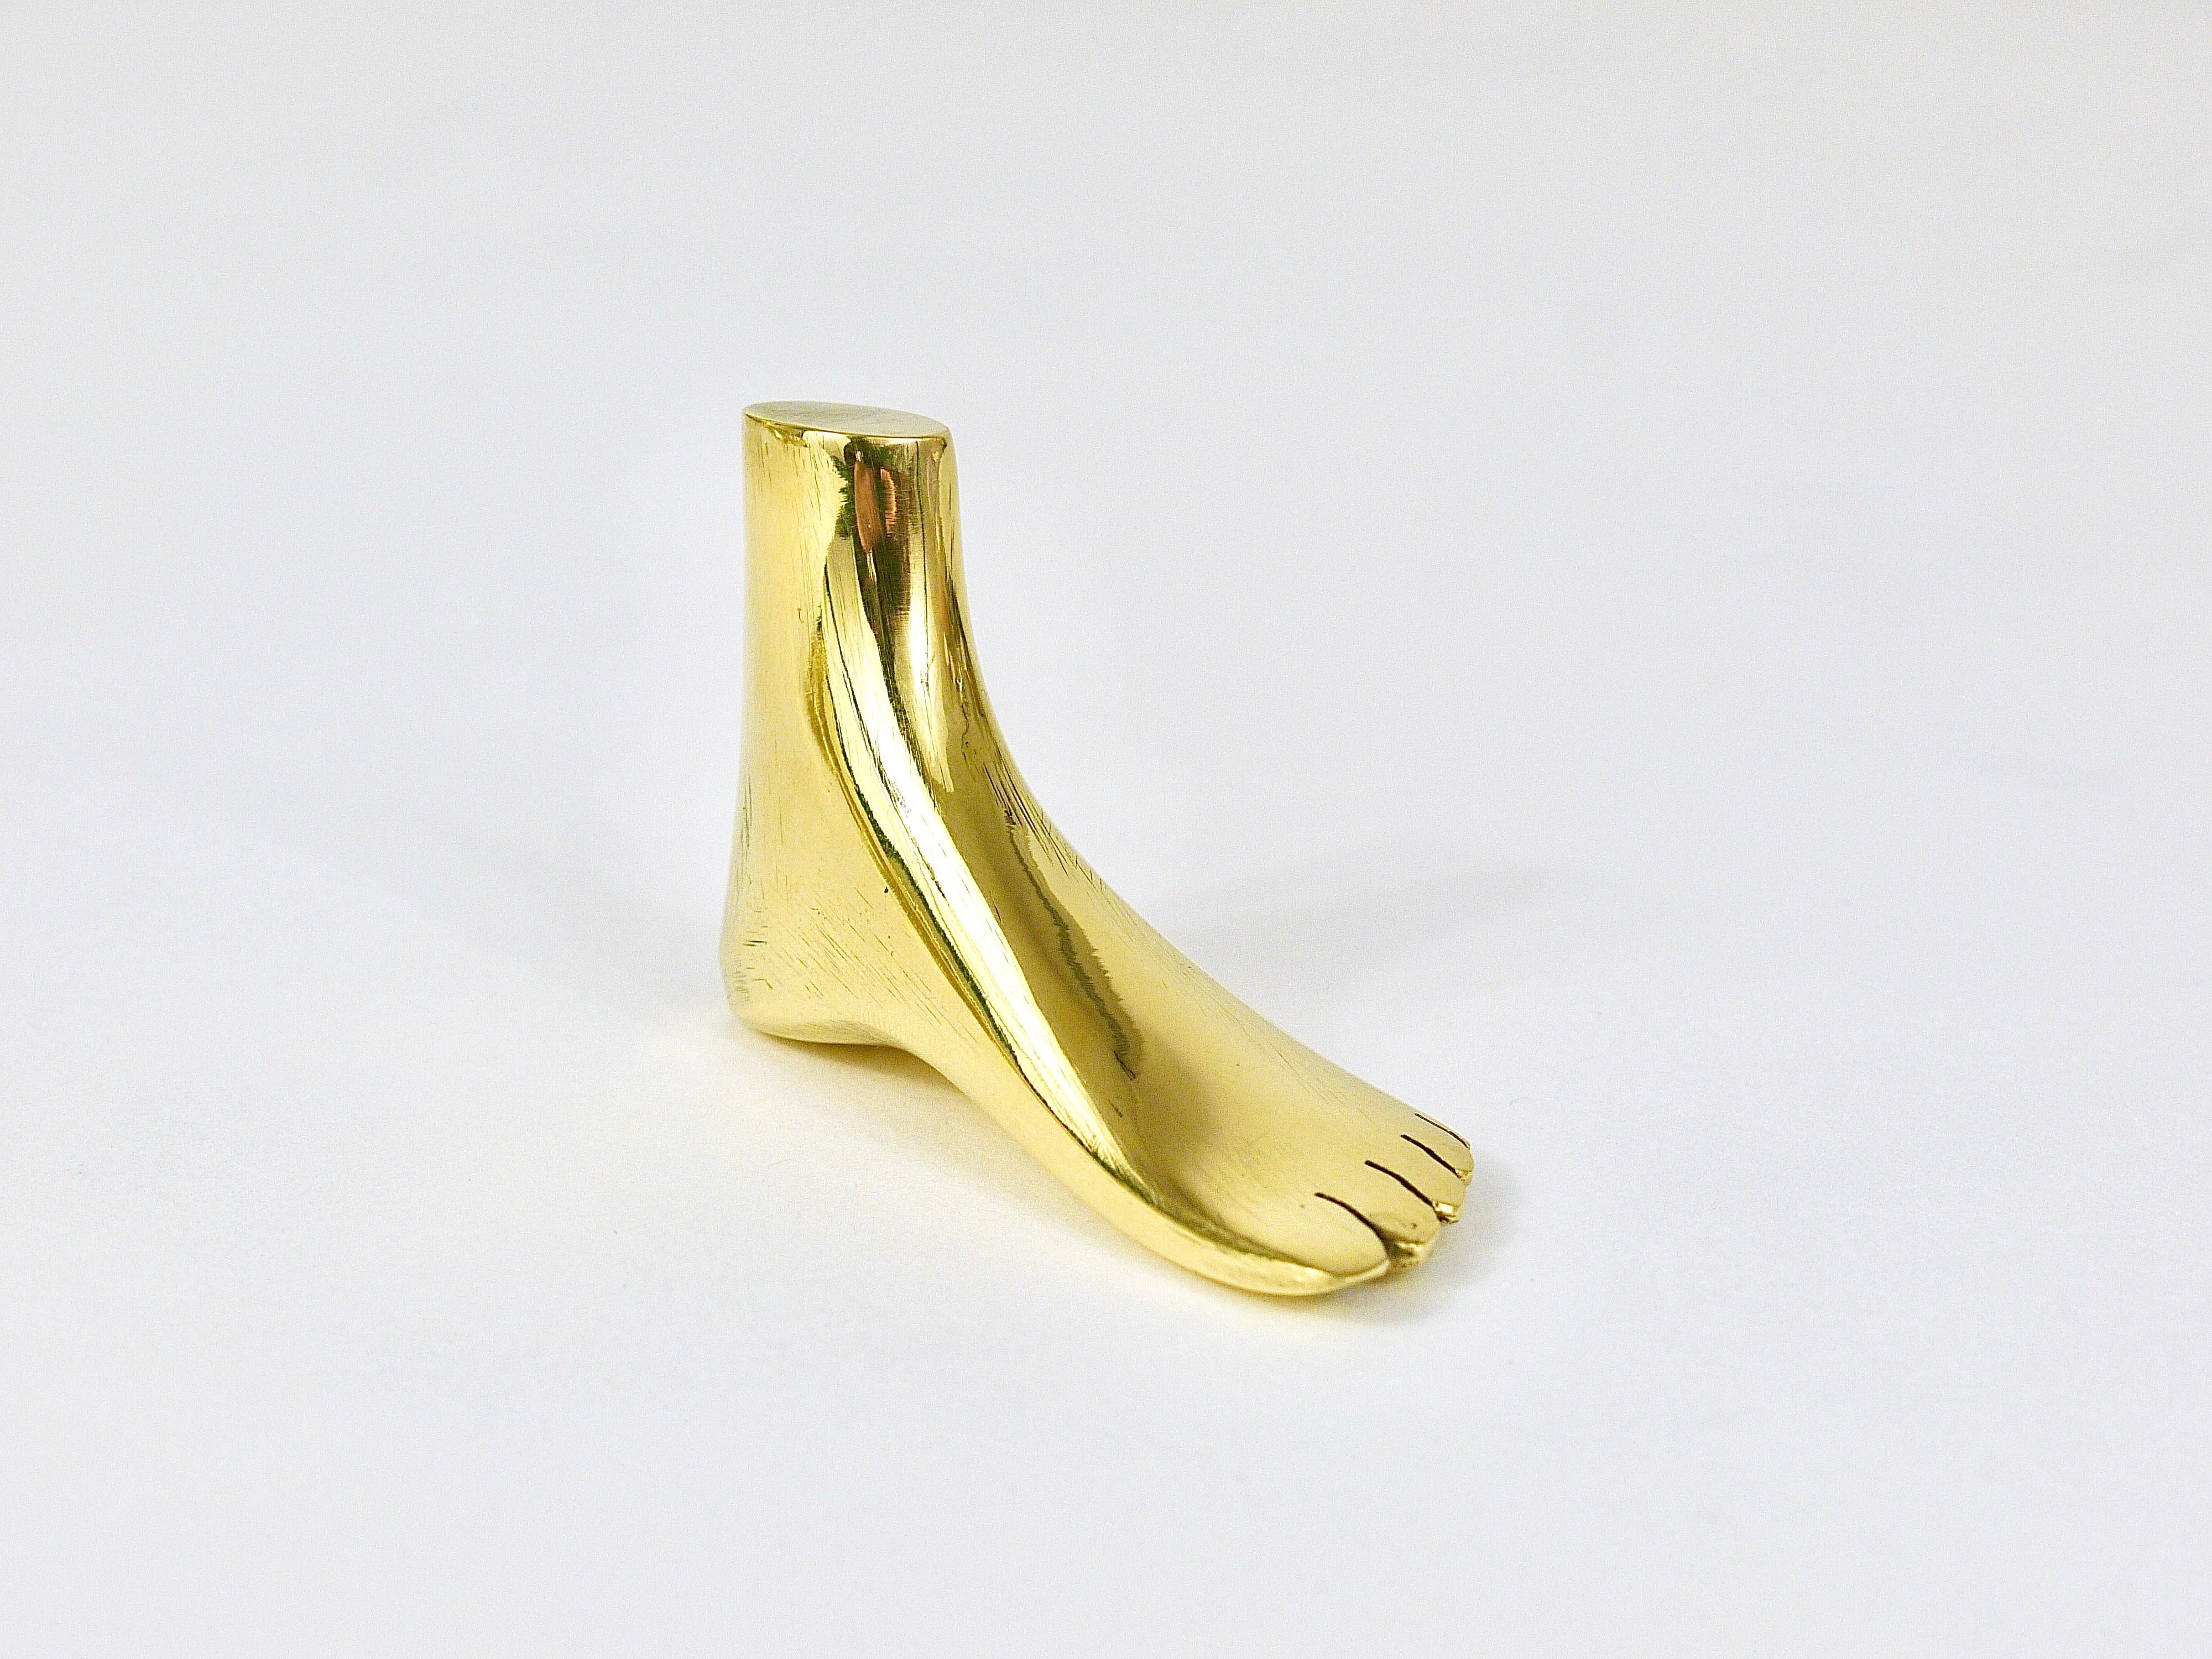 Signed Carl Auböck Midcentury Brass Foot Paperweight Handmade Sculpture For Sale 2